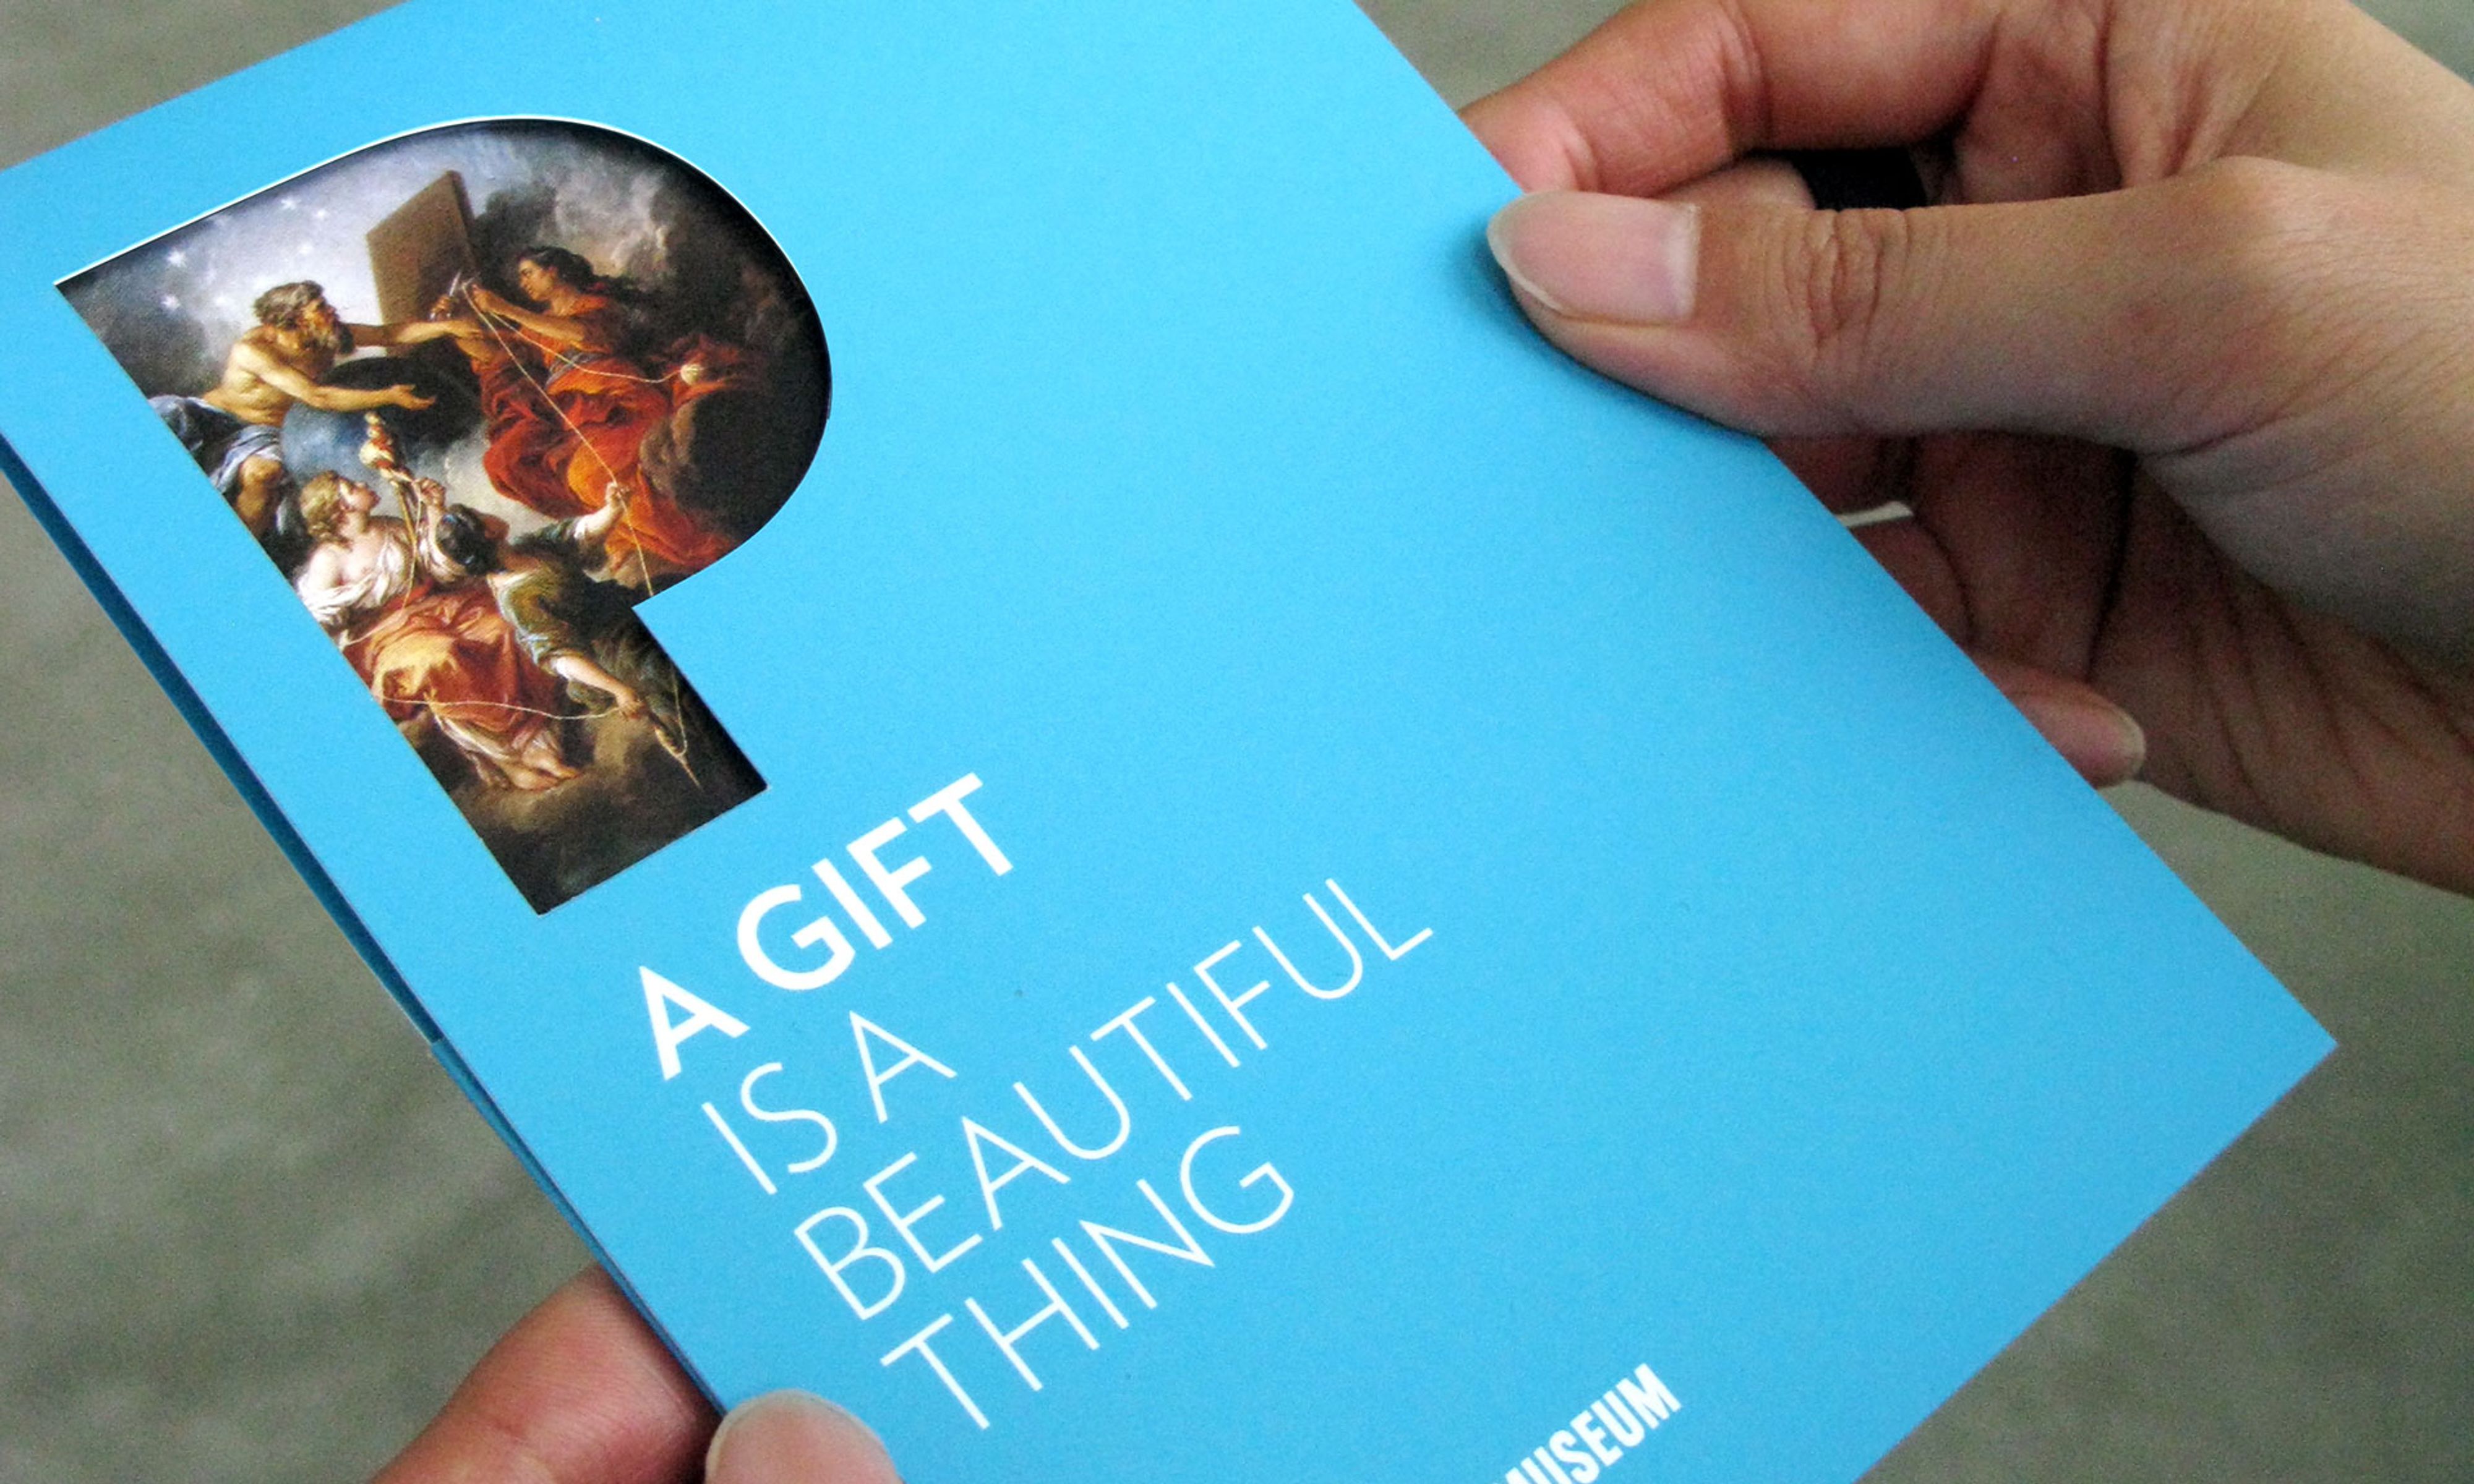 Hands holding a light blue pamphlet that reads “A gift is a beautiful thing”